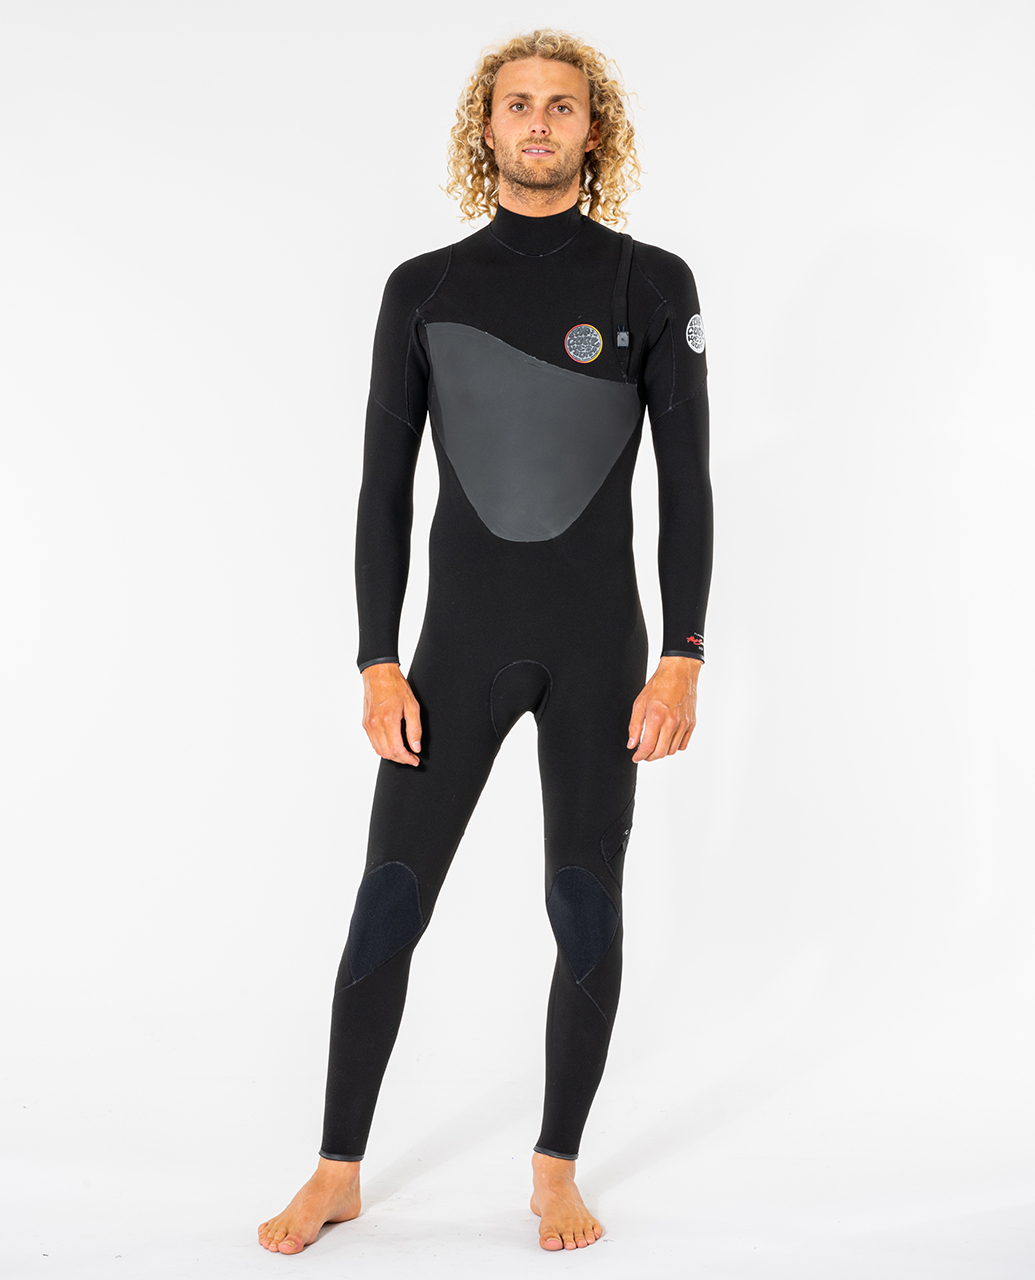 Rip Curl S/S 22 Wetsuits Preview